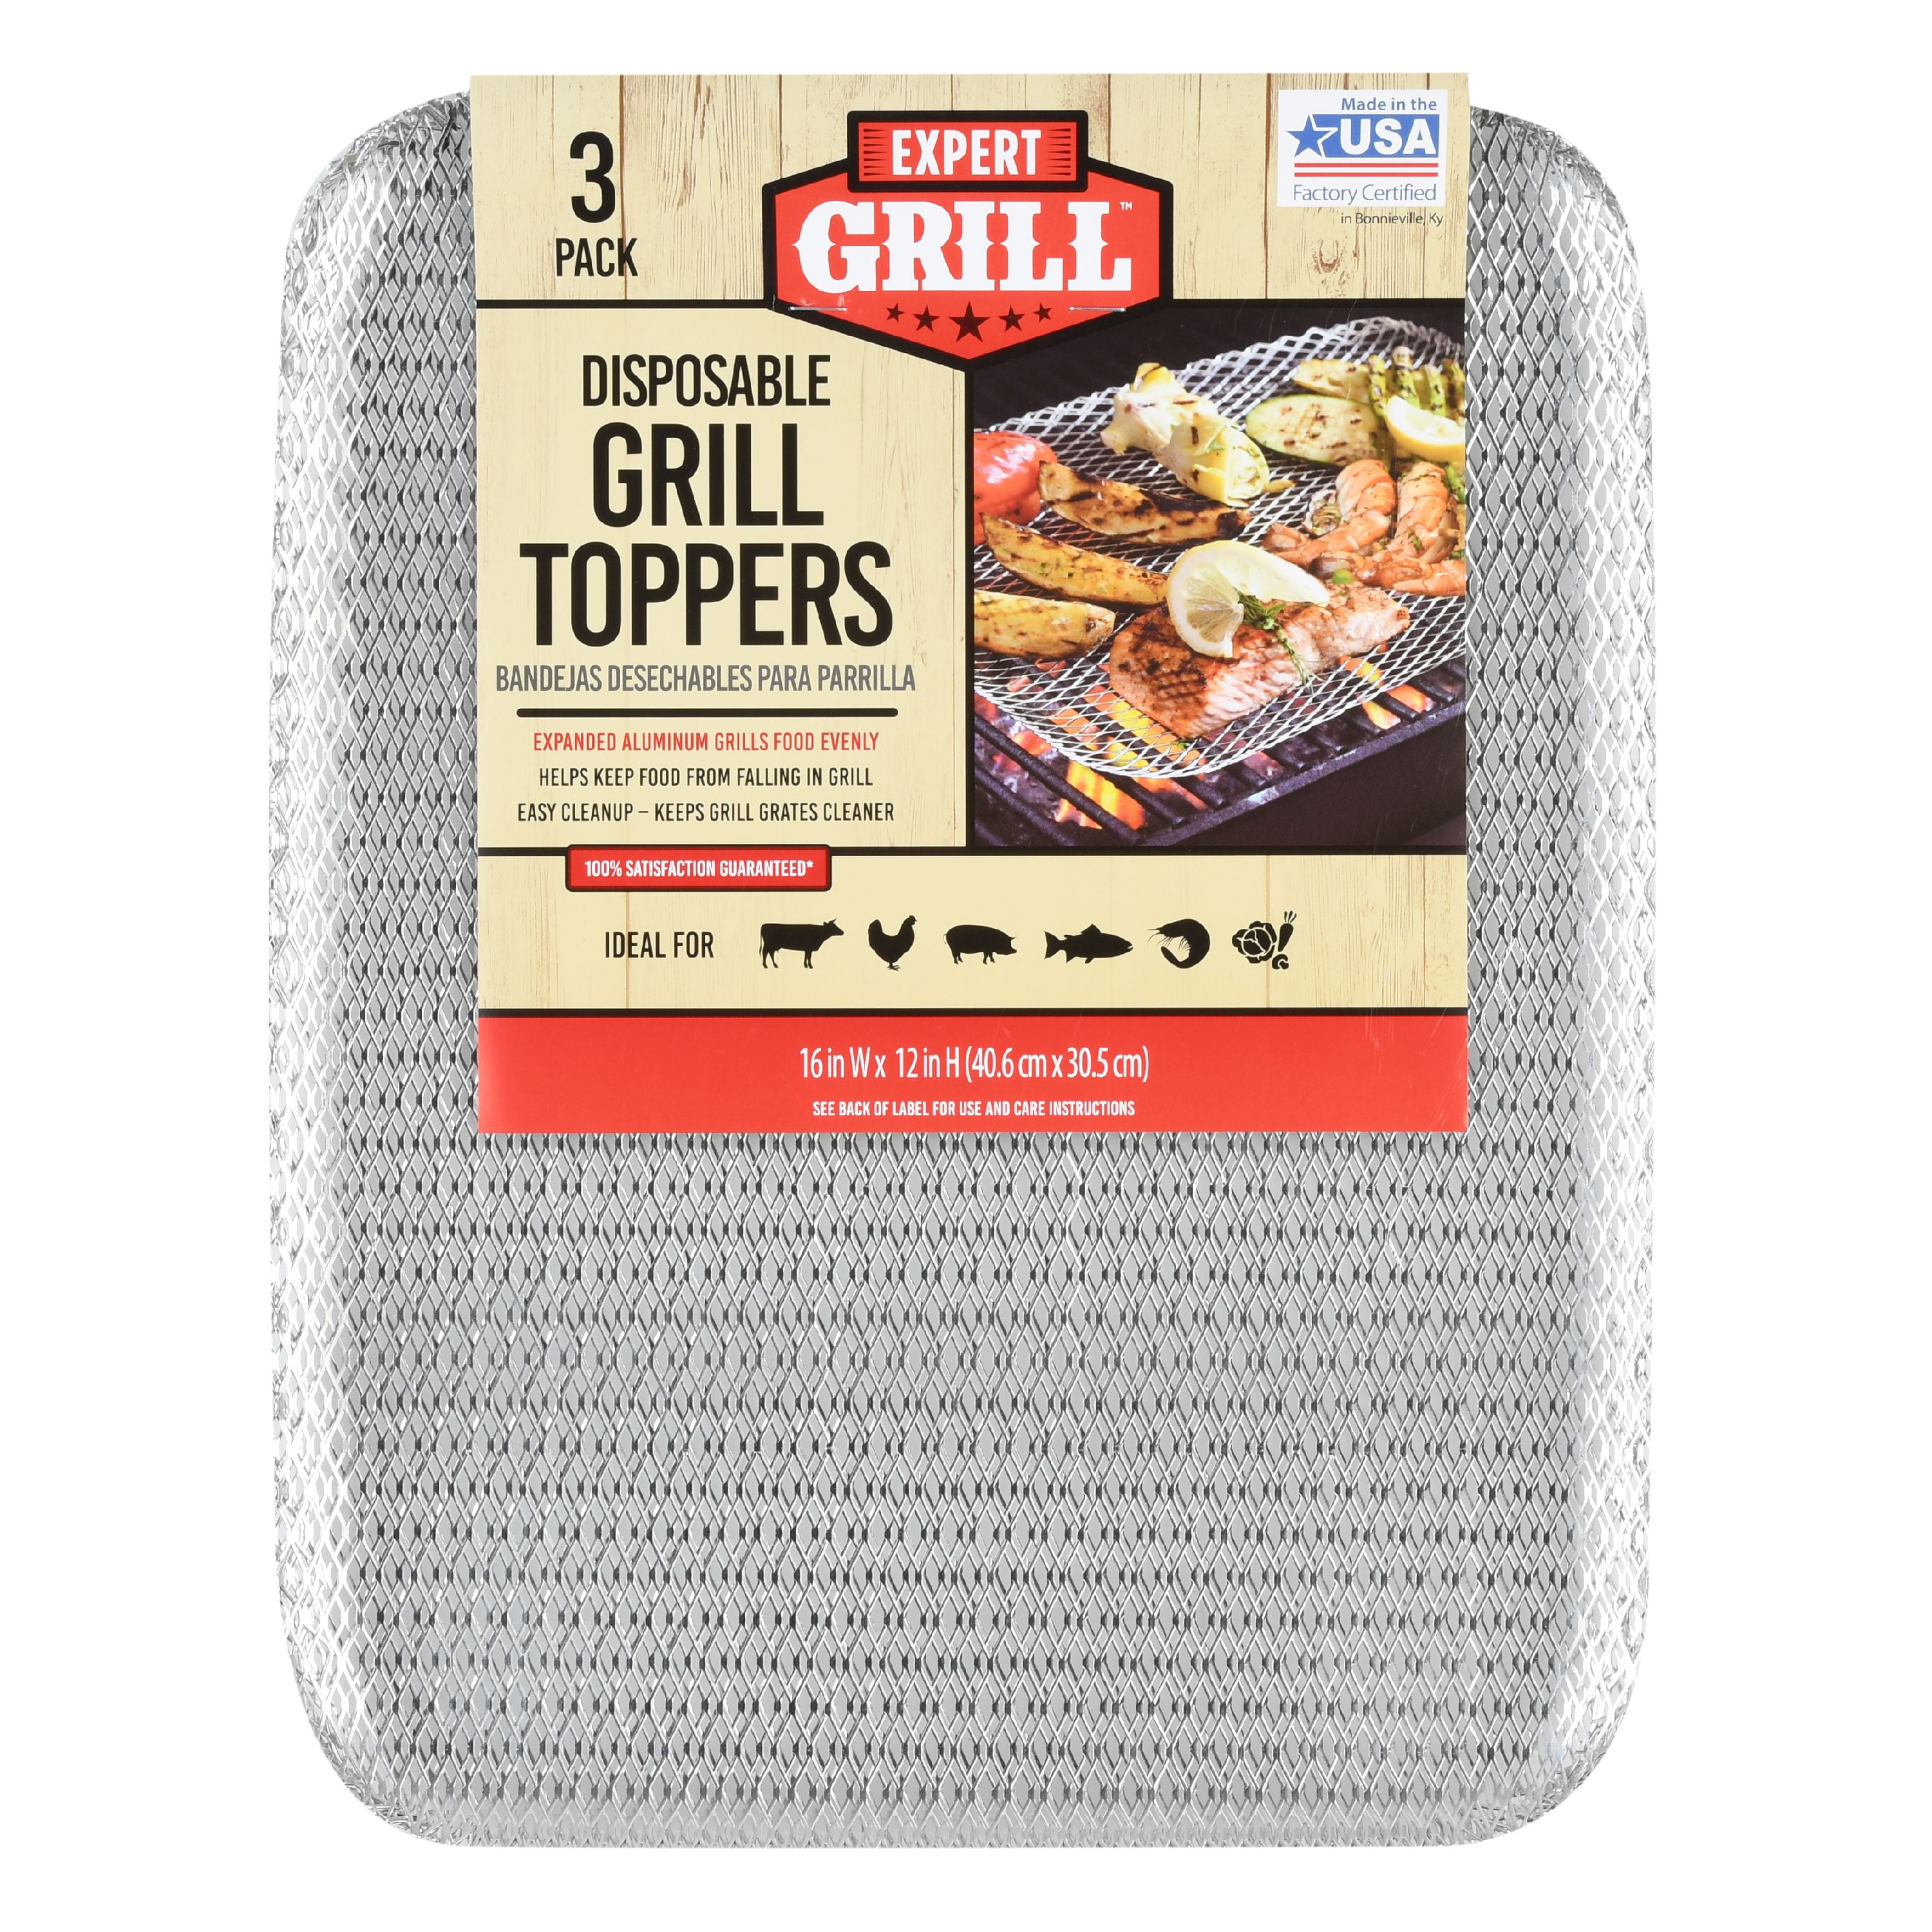 Expert Grill Disposable Grill Topper, 16' x 12', 3-Pack